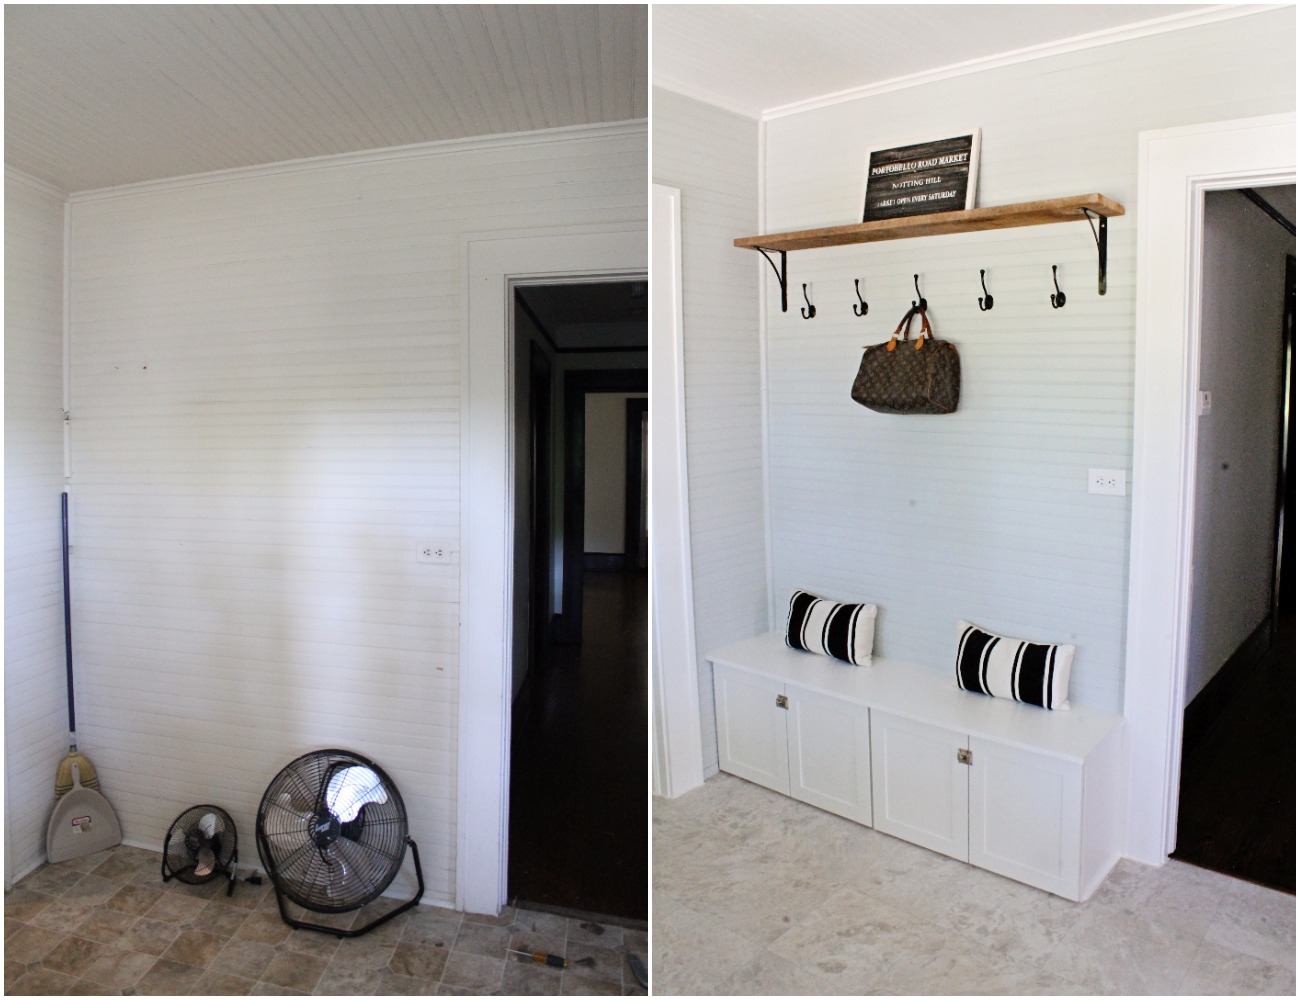 House Flipping Before and Afters - DIY BUDGET LAUNDRY ROOM MUD ROOM IDEAS (1).jpg